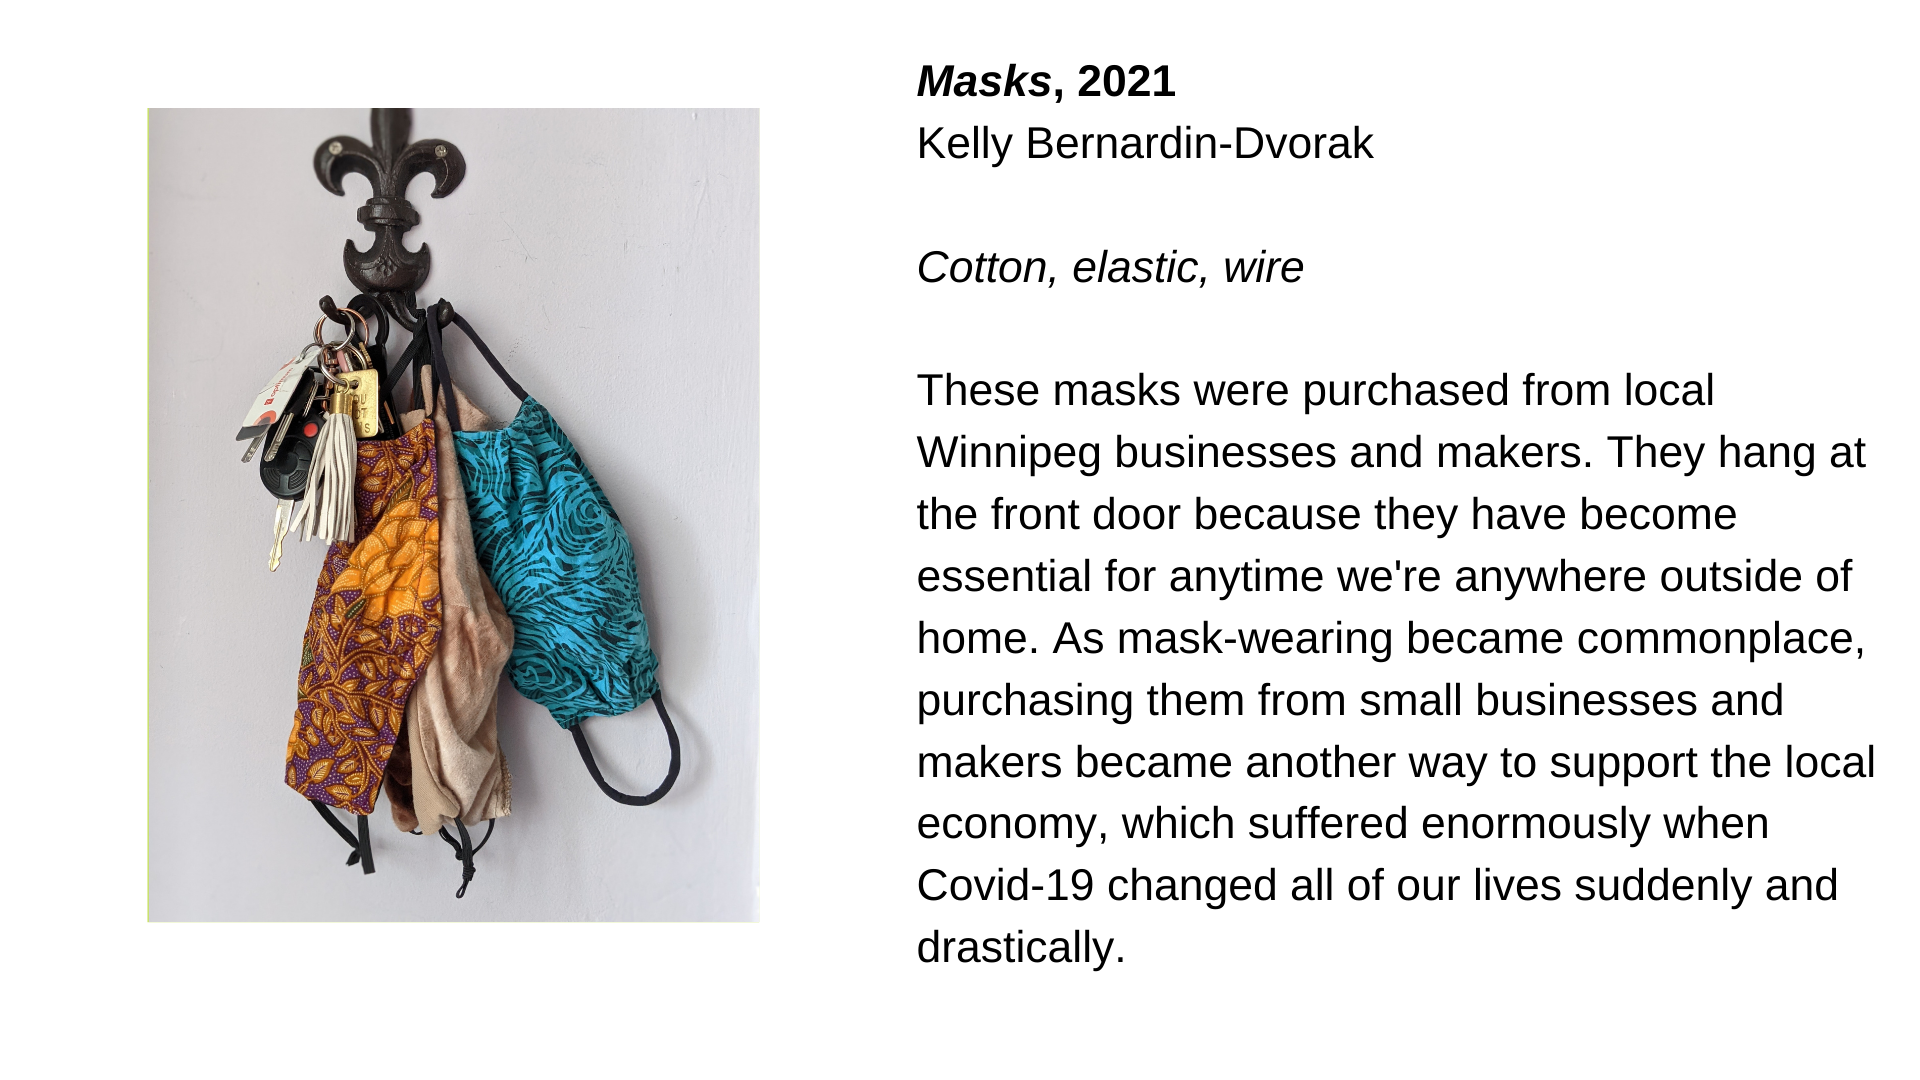  Colourful cloth masks hanging from a coat hook with keys. Next to this image, the text “Masks, 2021 - Kelly Bernardin-Dvorak. Cotton, elastic, wire. These masks were purchased from local Winnipeg businesses and makers.  They hang at the front door b